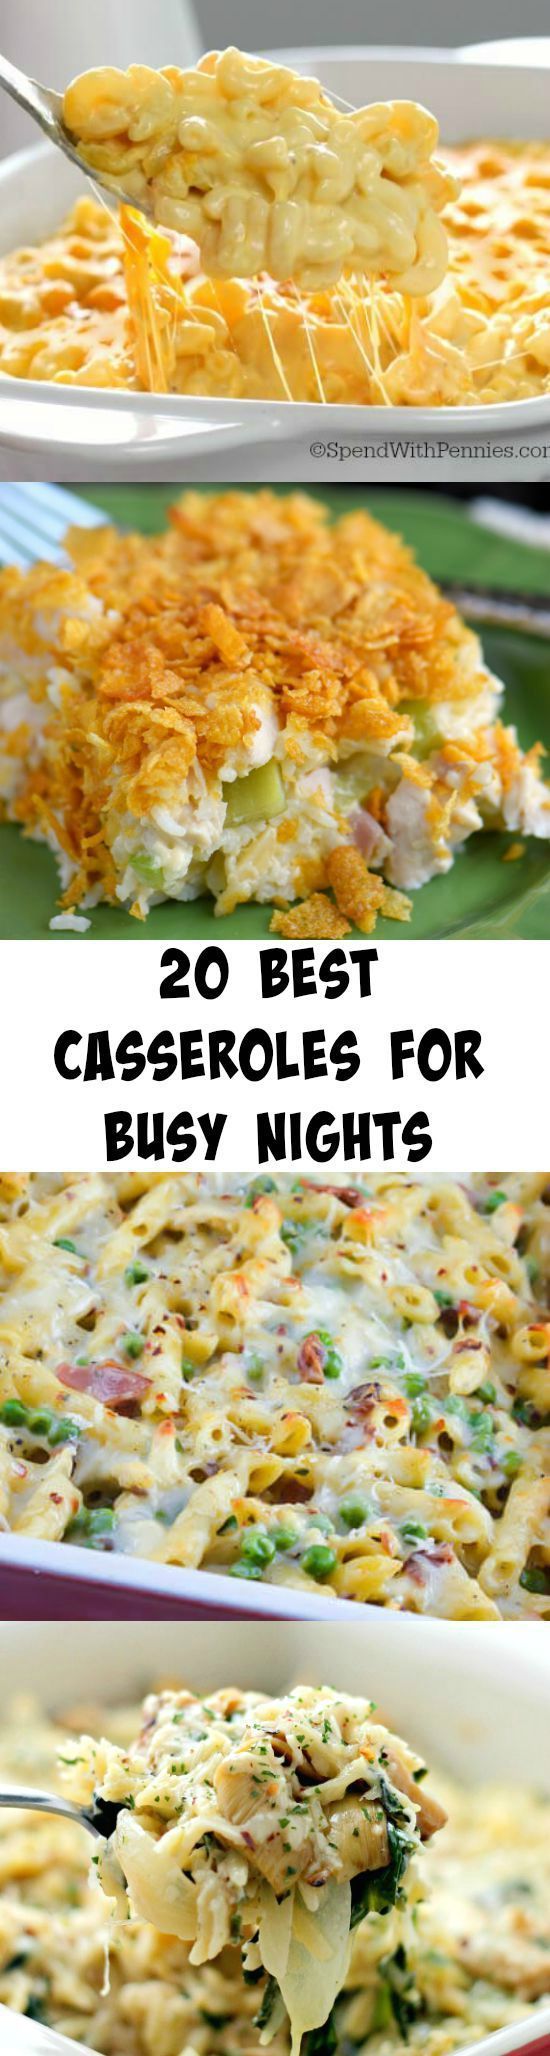 Everyone needs these recipes!!! 20 of the BEST Casseroles for Busy Nights!